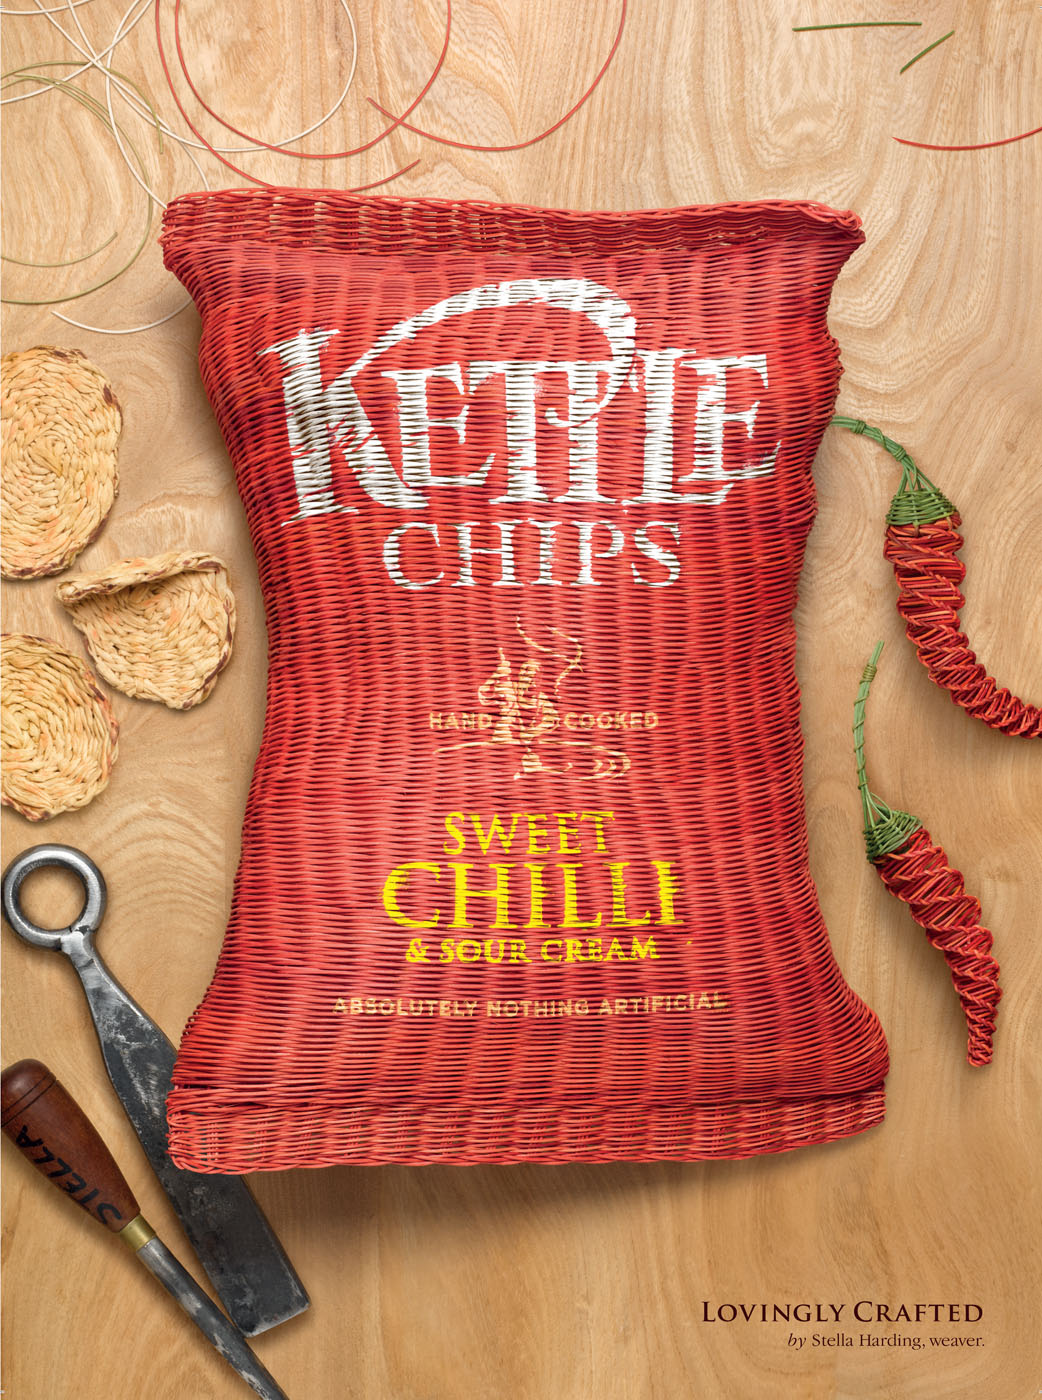 Wicker Kettle Chips packet in workshop by Alexander Kent London based still life and product photographer.